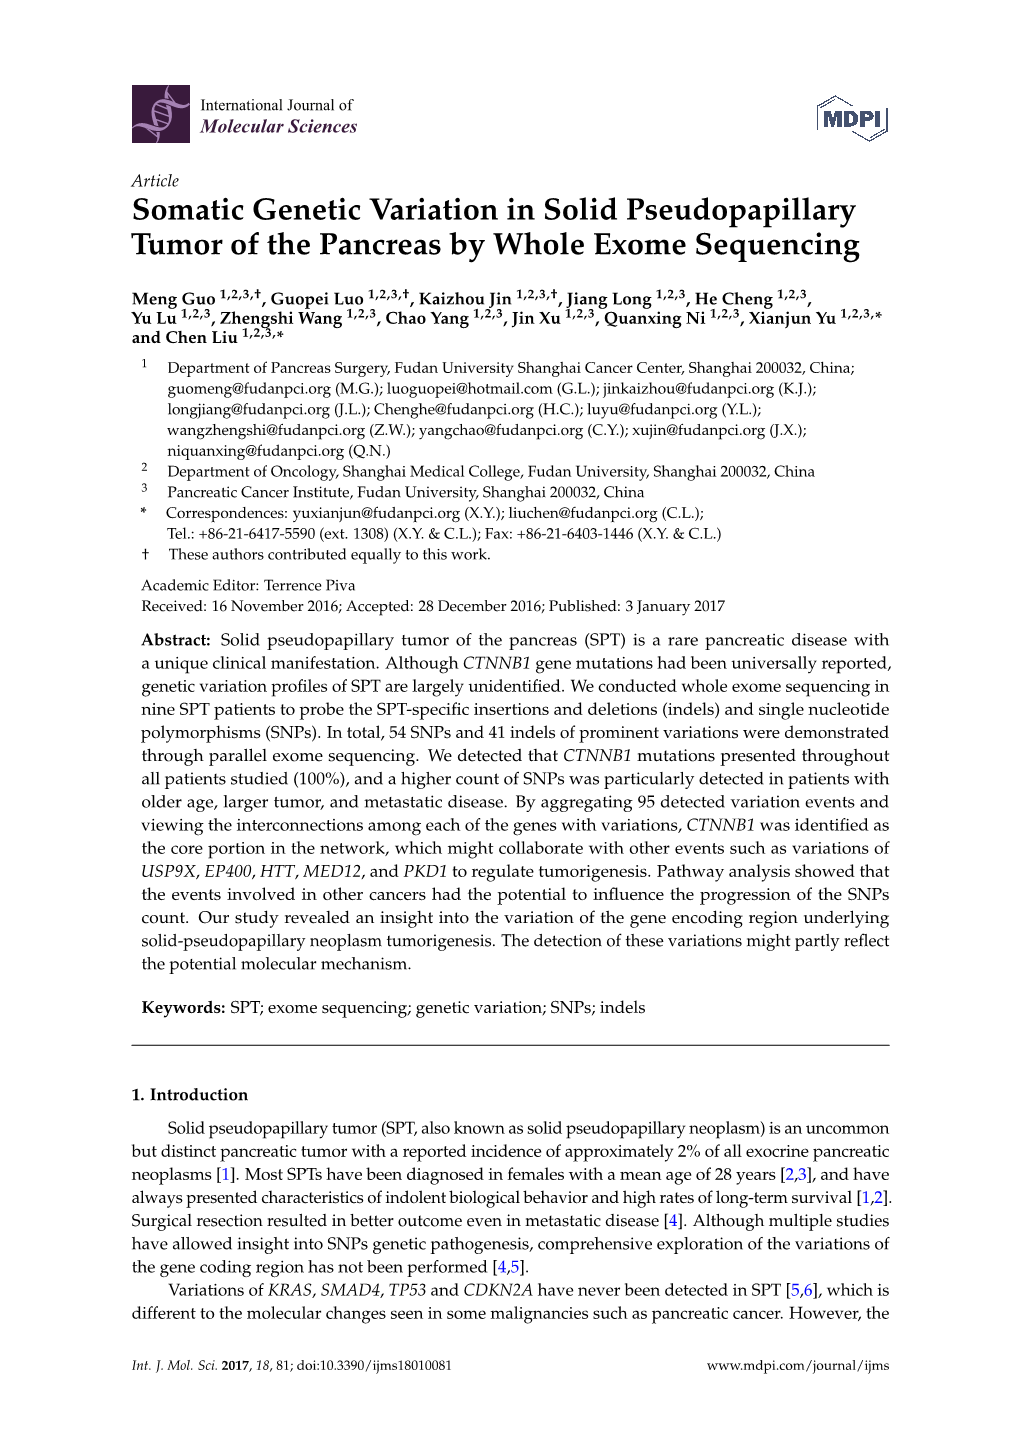 Somatic Genetic Variation in Solid Pseudopapillary Tumor of the Pancreas by Whole Exome Sequencing